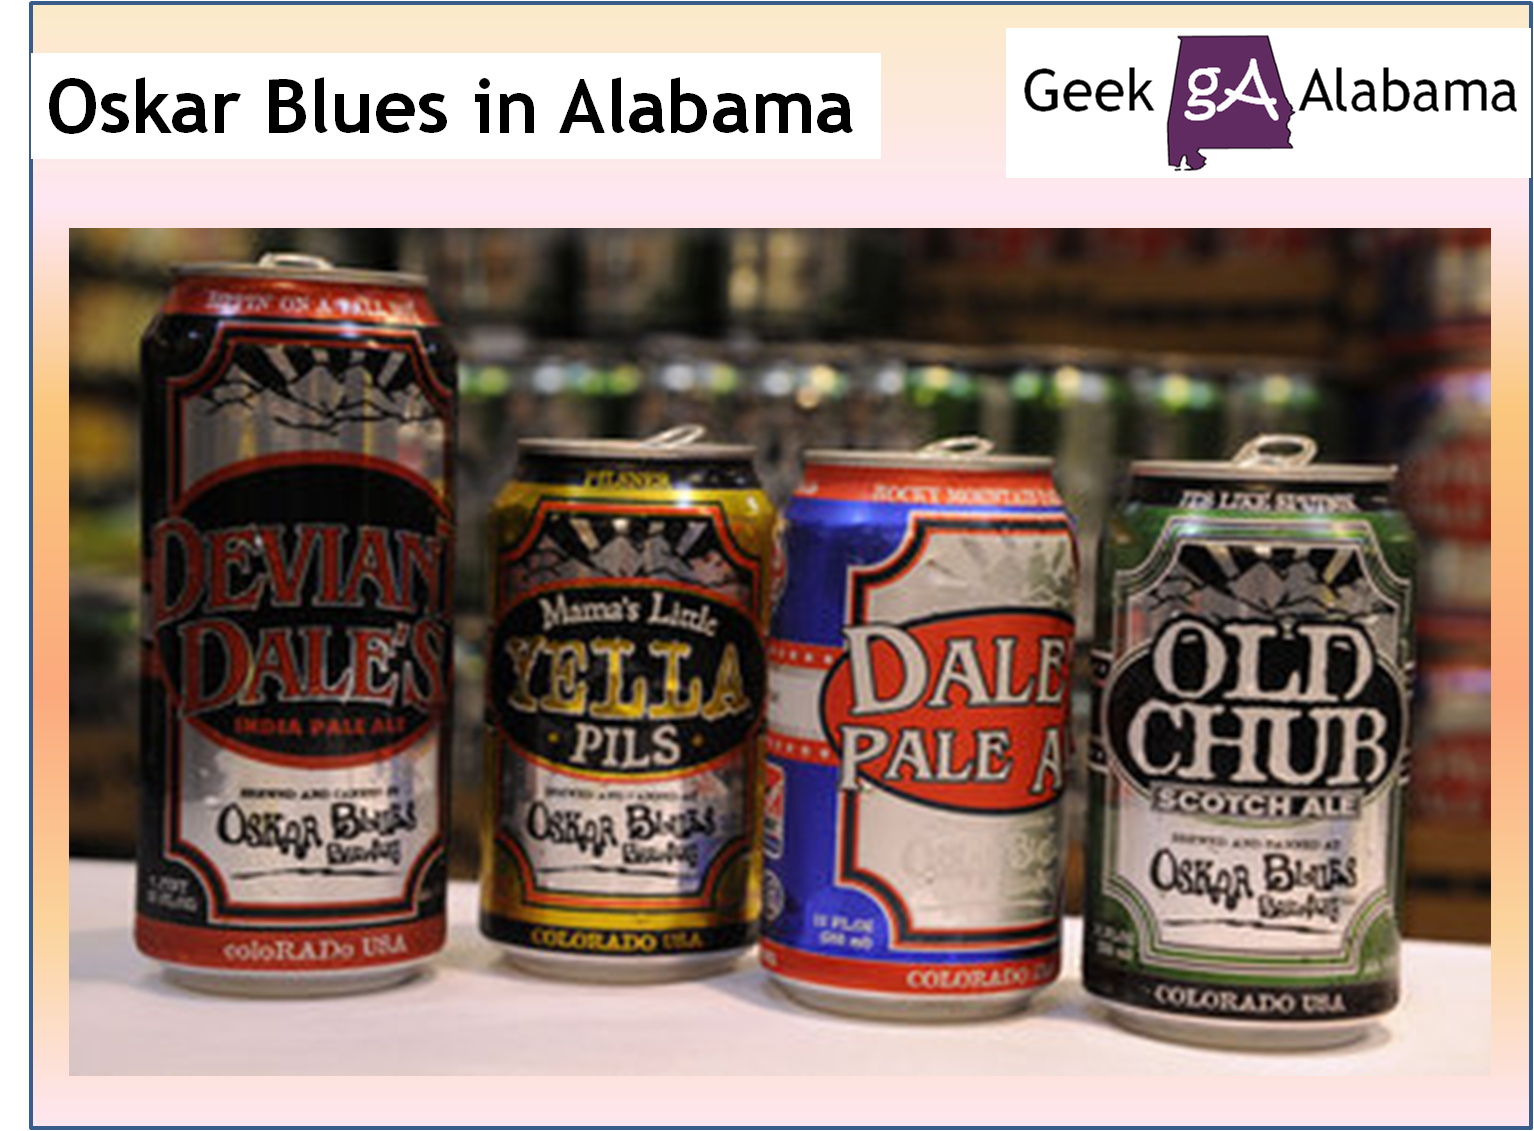 Can beer be bought on Sundays in Alabama?